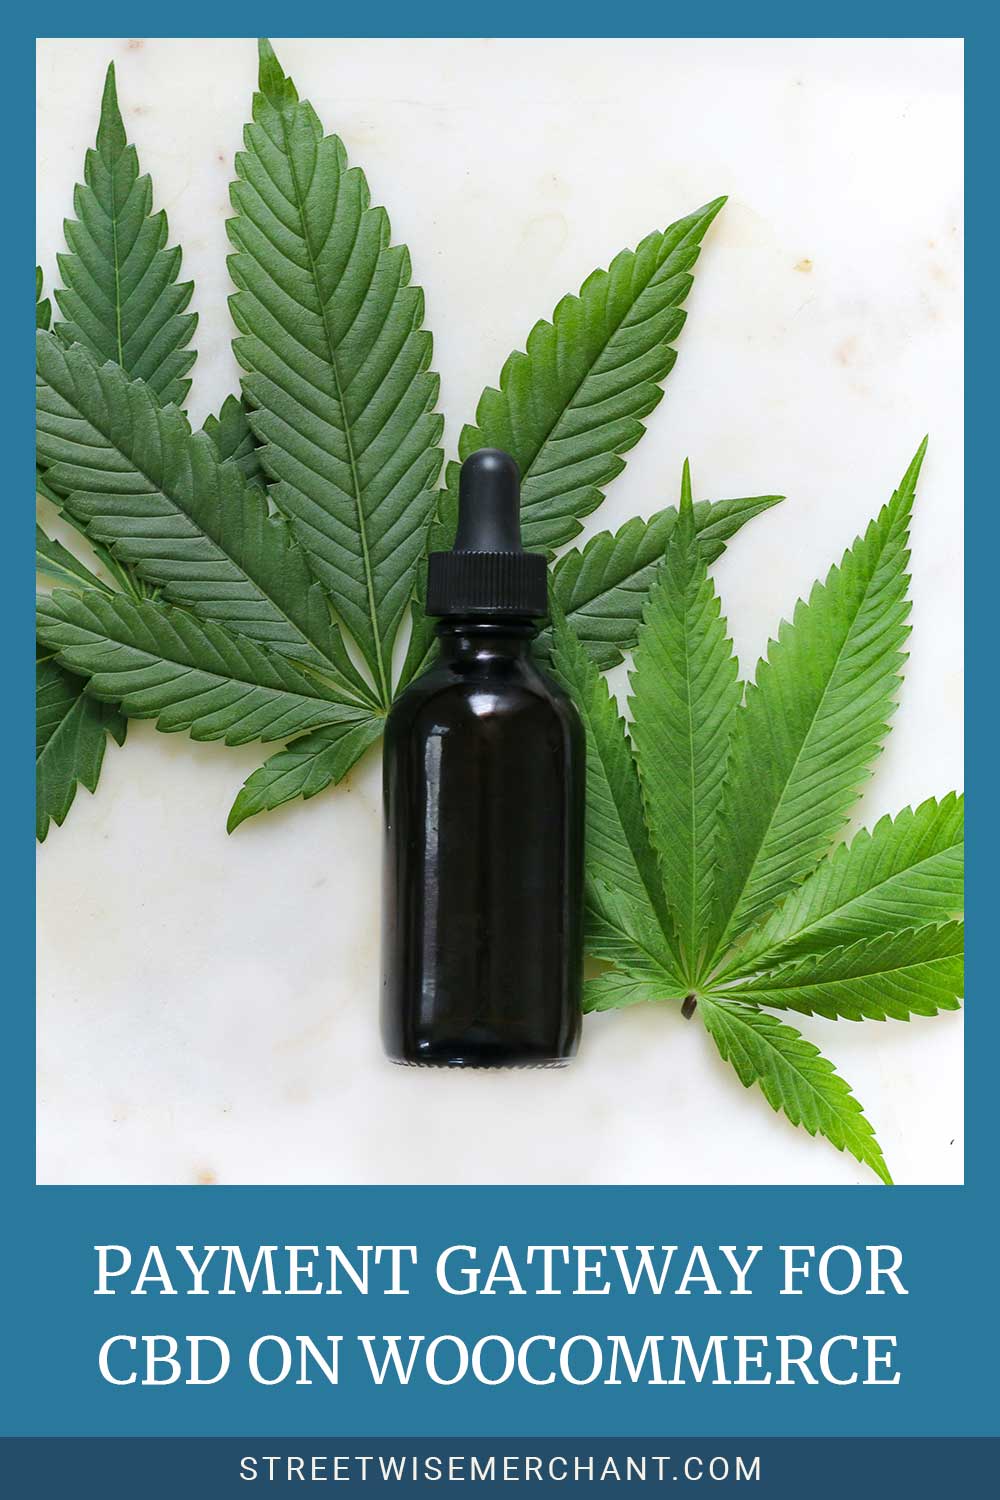 CBD bottle and leaves on a white surface - Payment gateway for CBD on WooCommerce